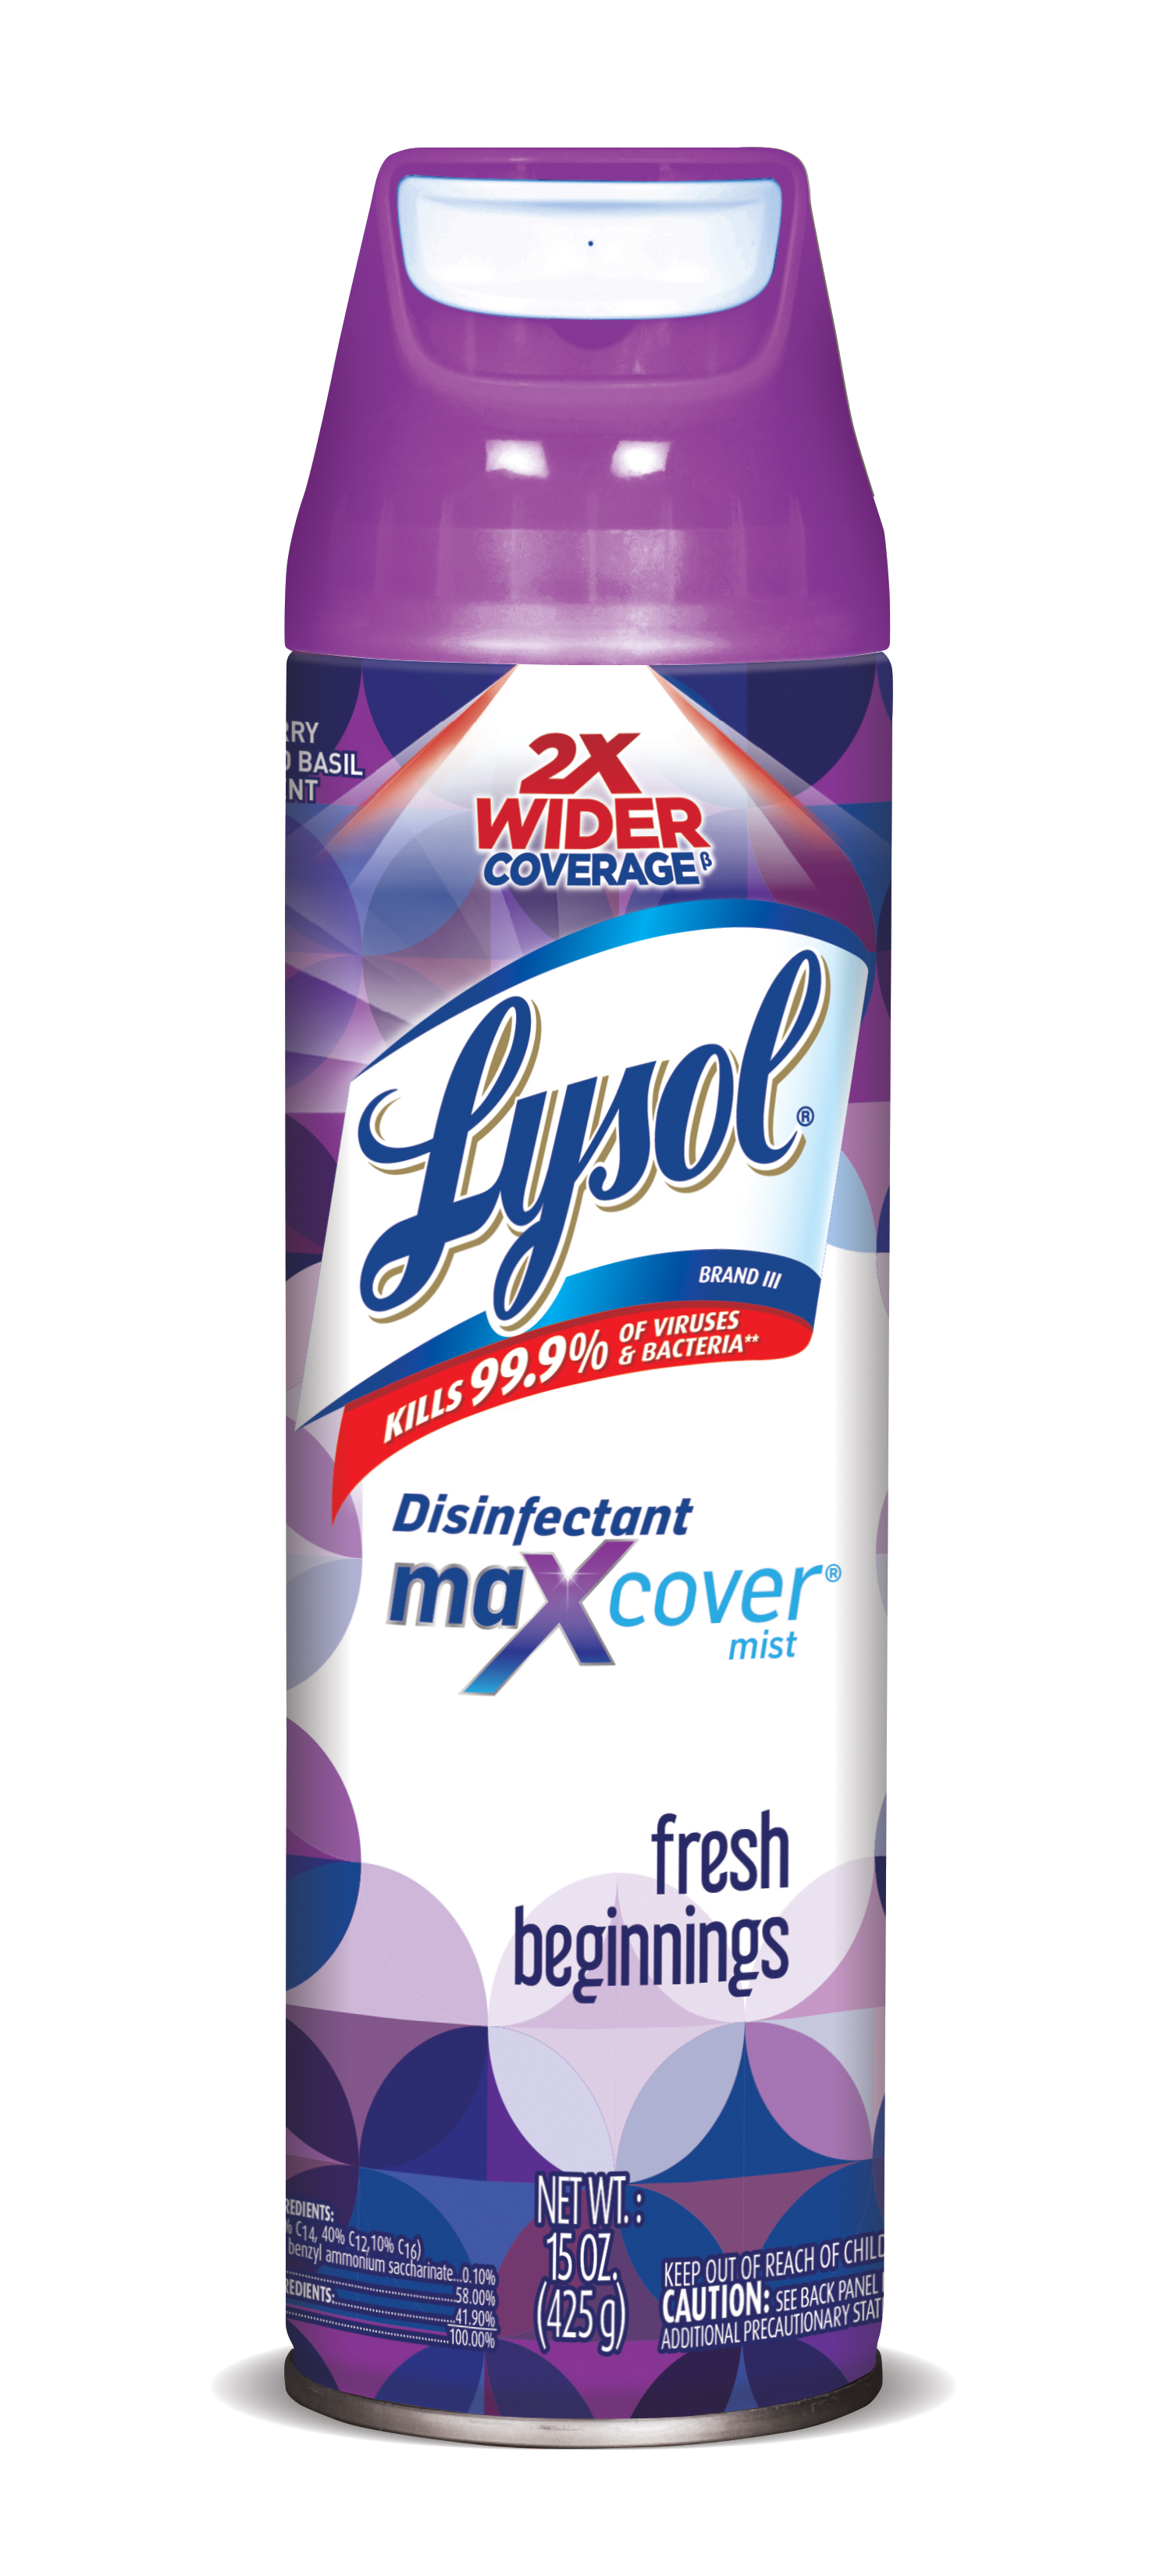 LYSOL Disinfectant Max Cover Mist  Fresh Beginnings